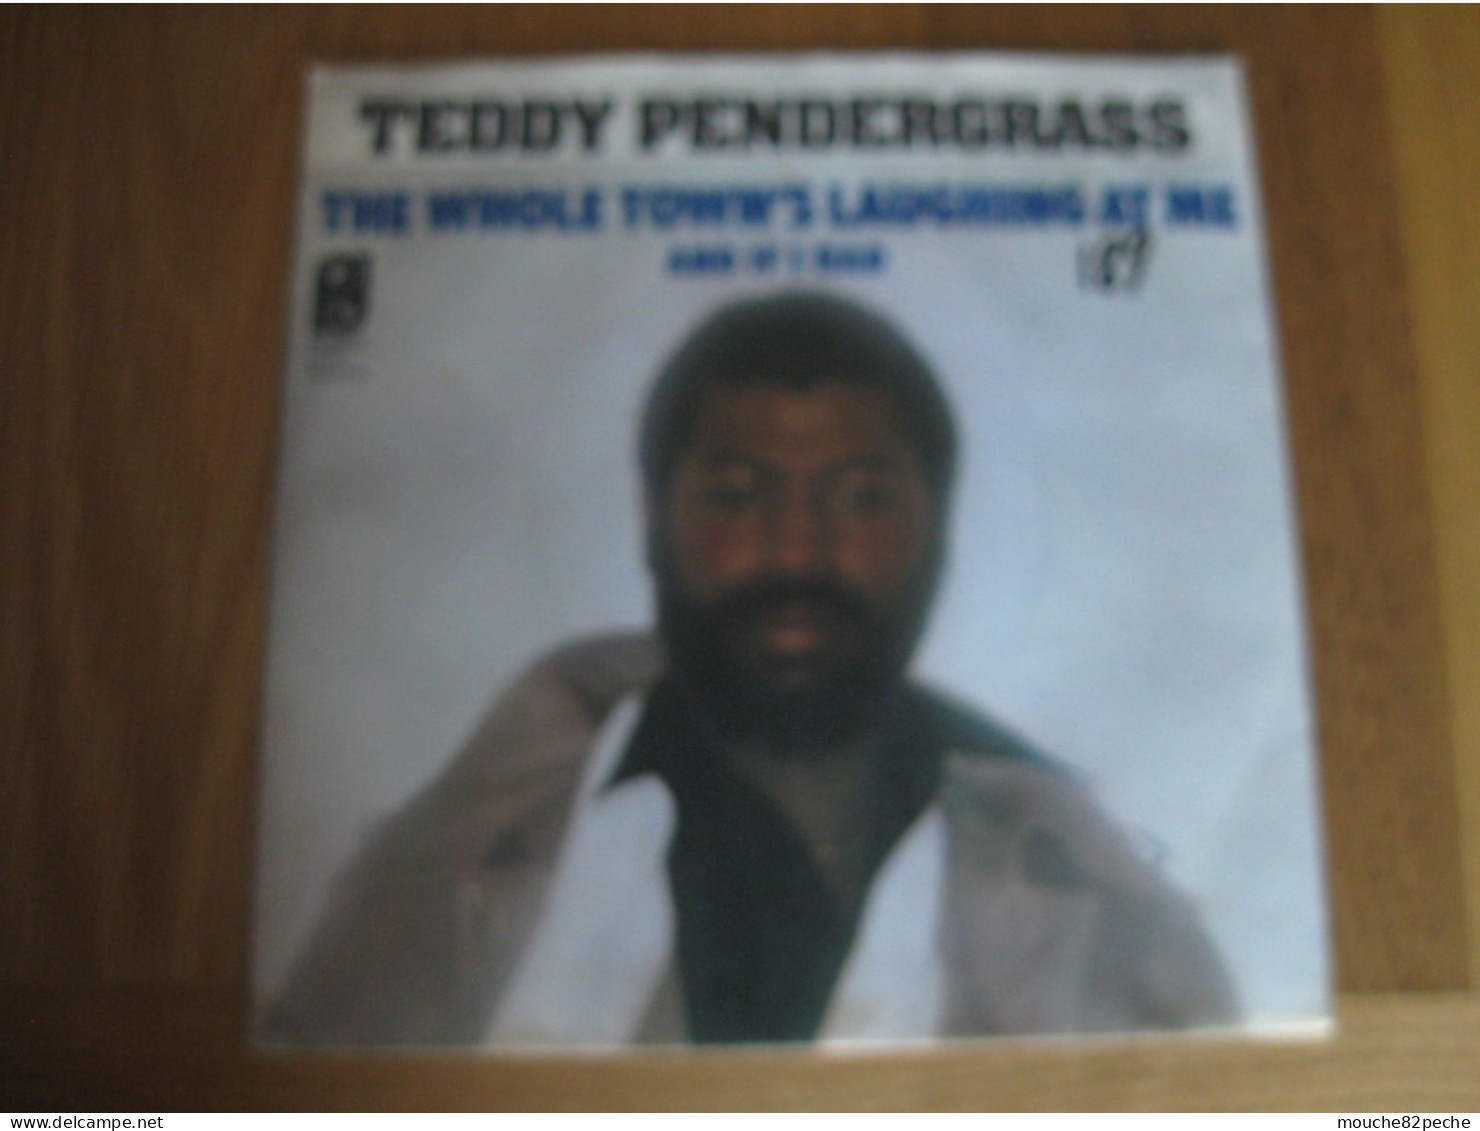 45 T - TEDDY PENDERGRASS - THE WHOLE TOWN'S LAUGHING AT ME - Soul - R&B